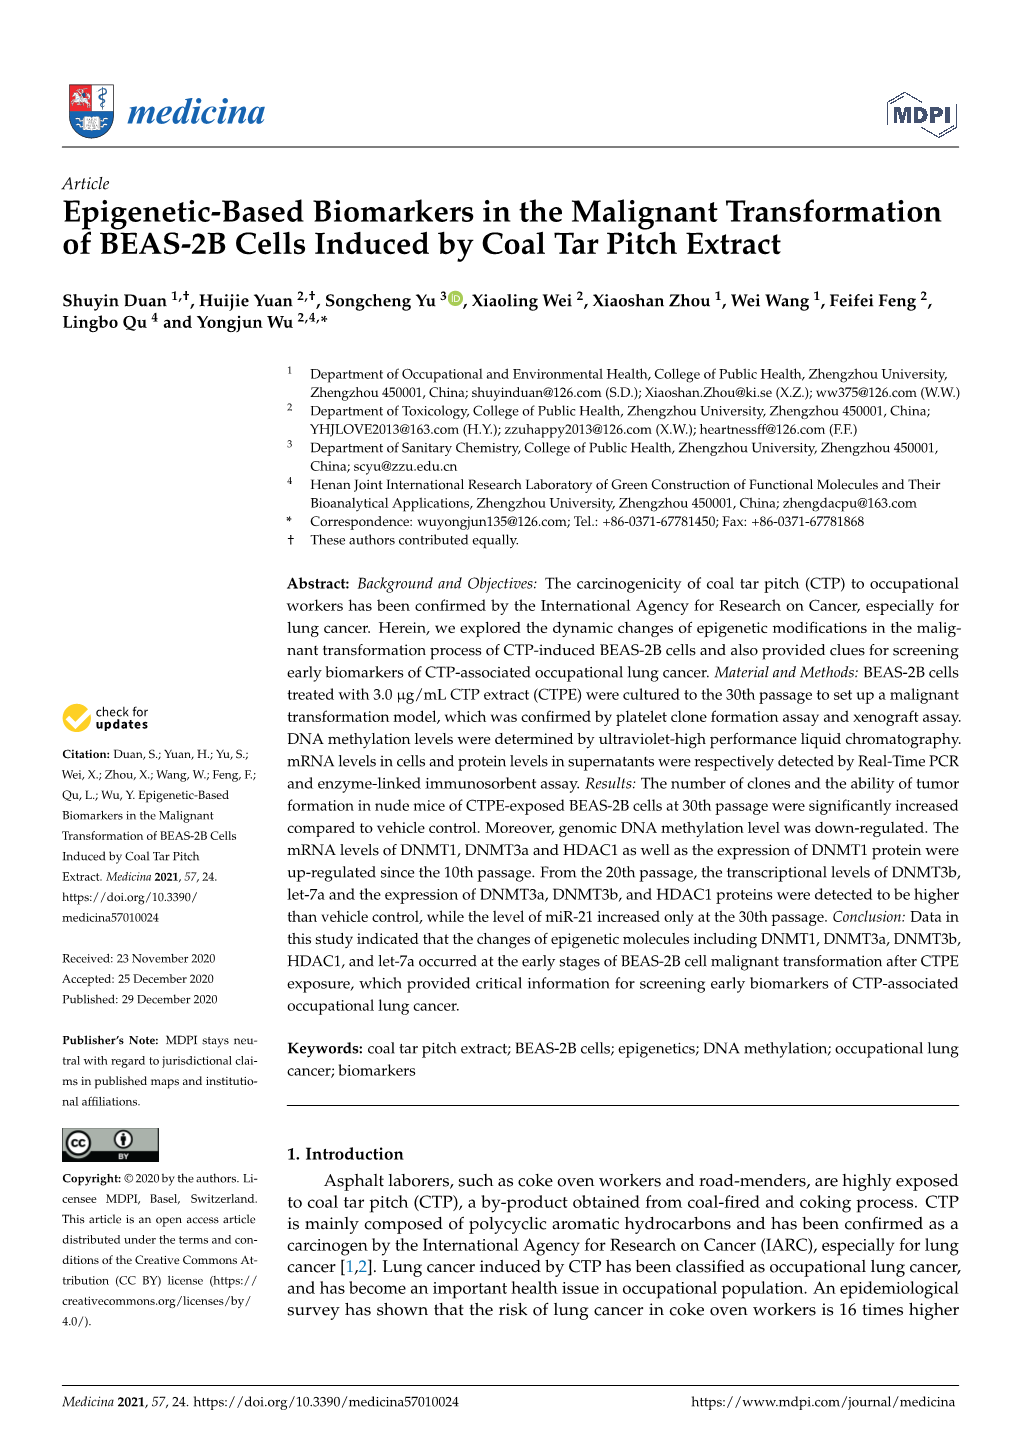 Epigenetic-Based Biomarkers in the Malignant Transformation of BEAS-2B Cells Induced by Coal Tar Pitch Extract